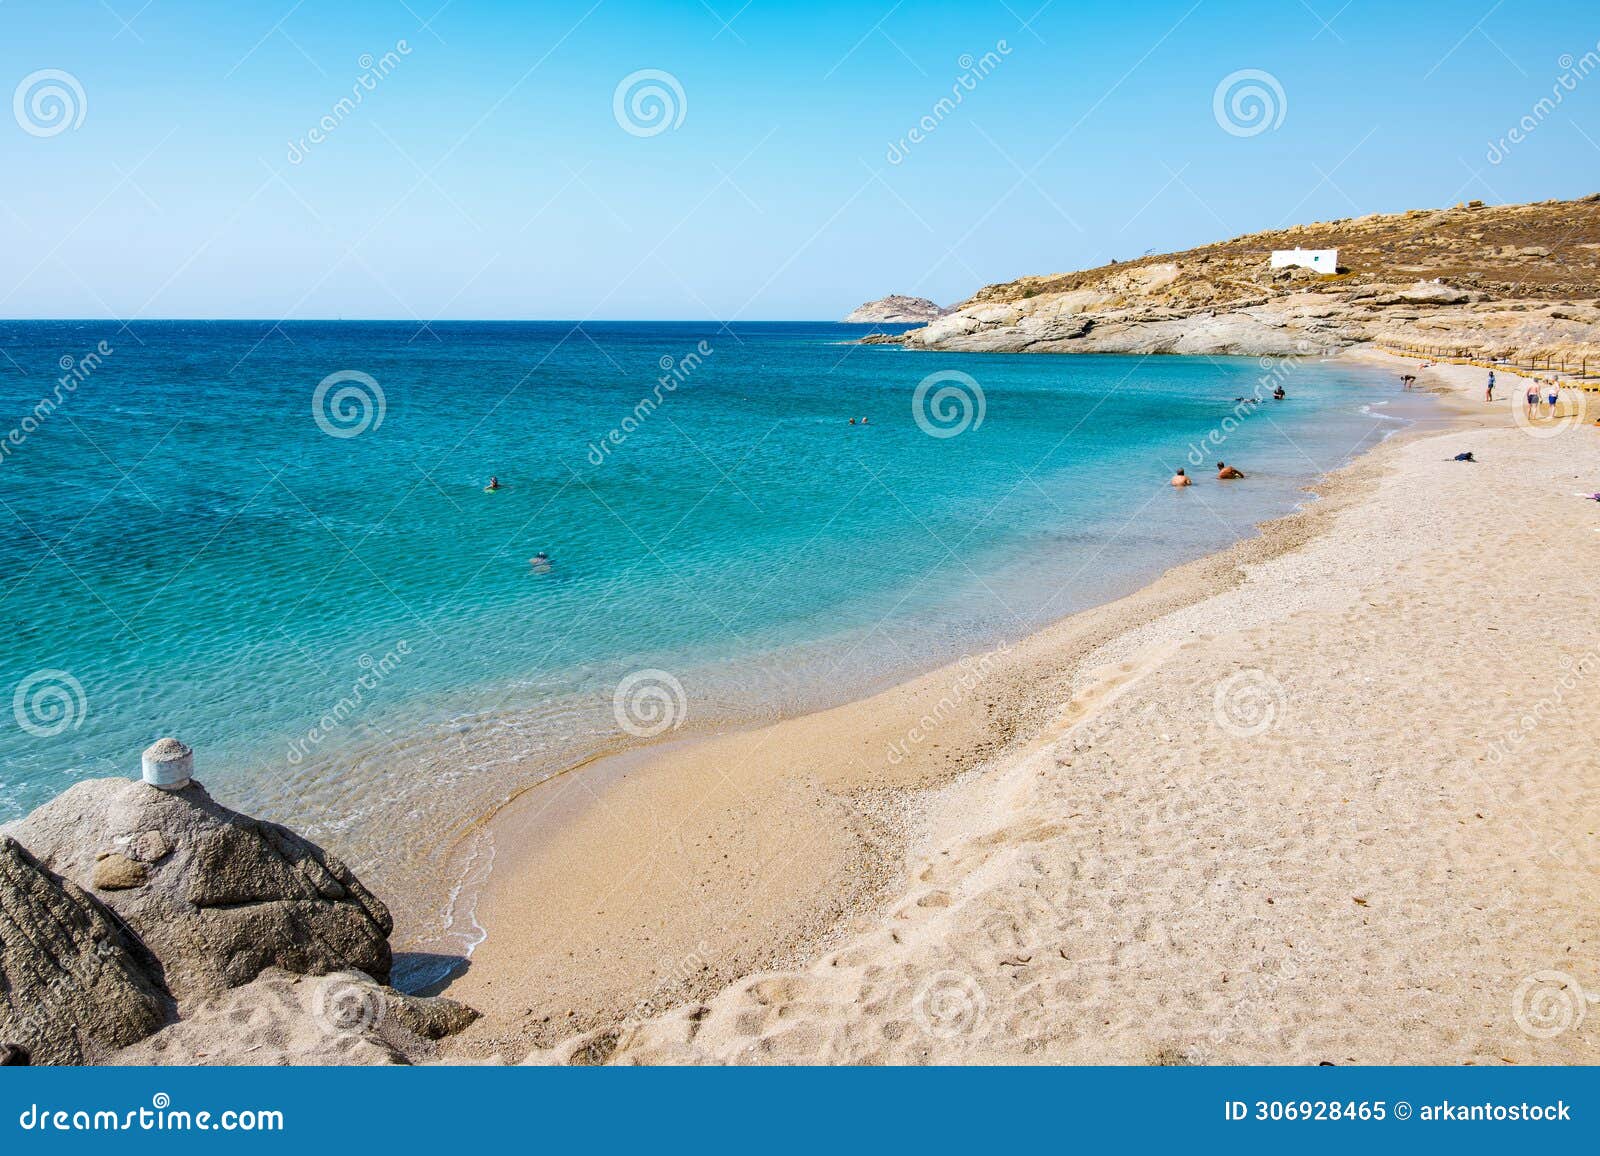 lia beach, wild and free beach in the south of mykonos, greece.